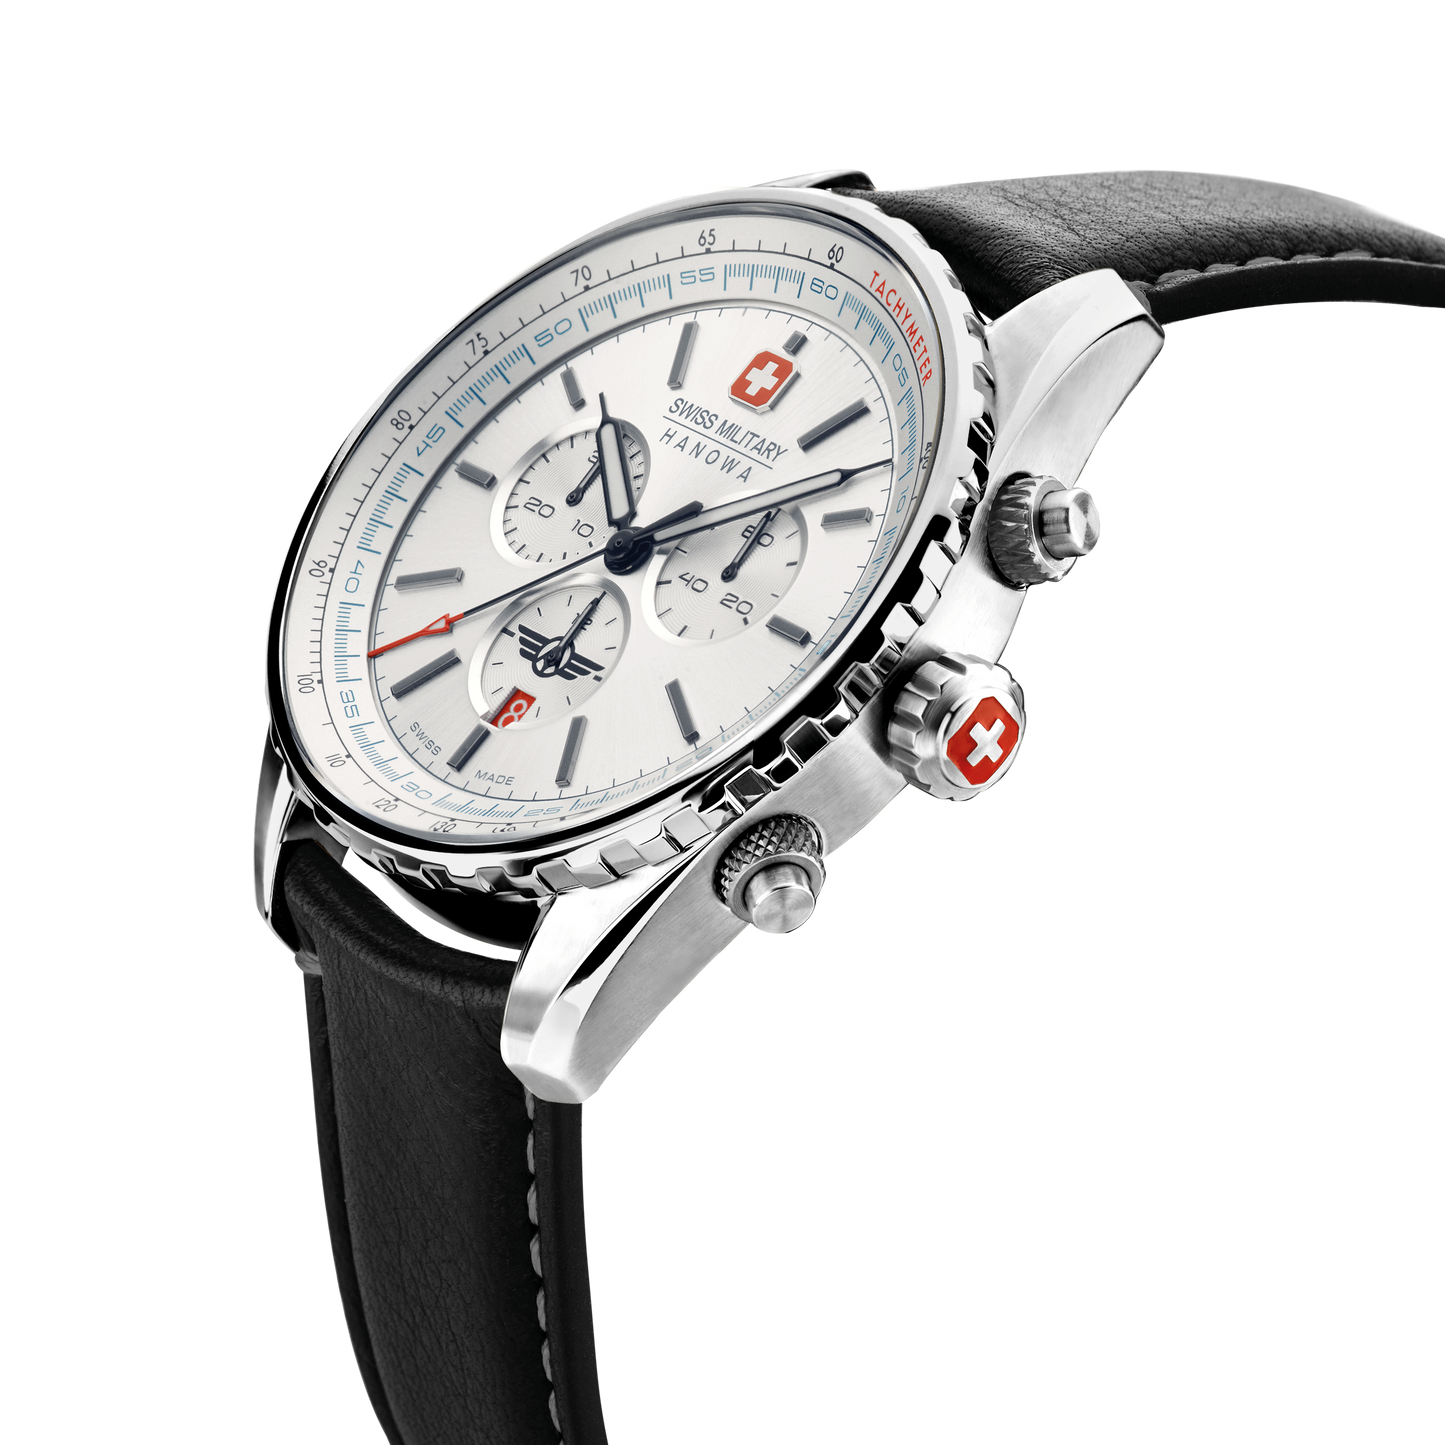 Swiss Military Hanowa Afterburn Chrono. Stainless steel case, silver dial and a genuine black Italian leather strap. Side image.